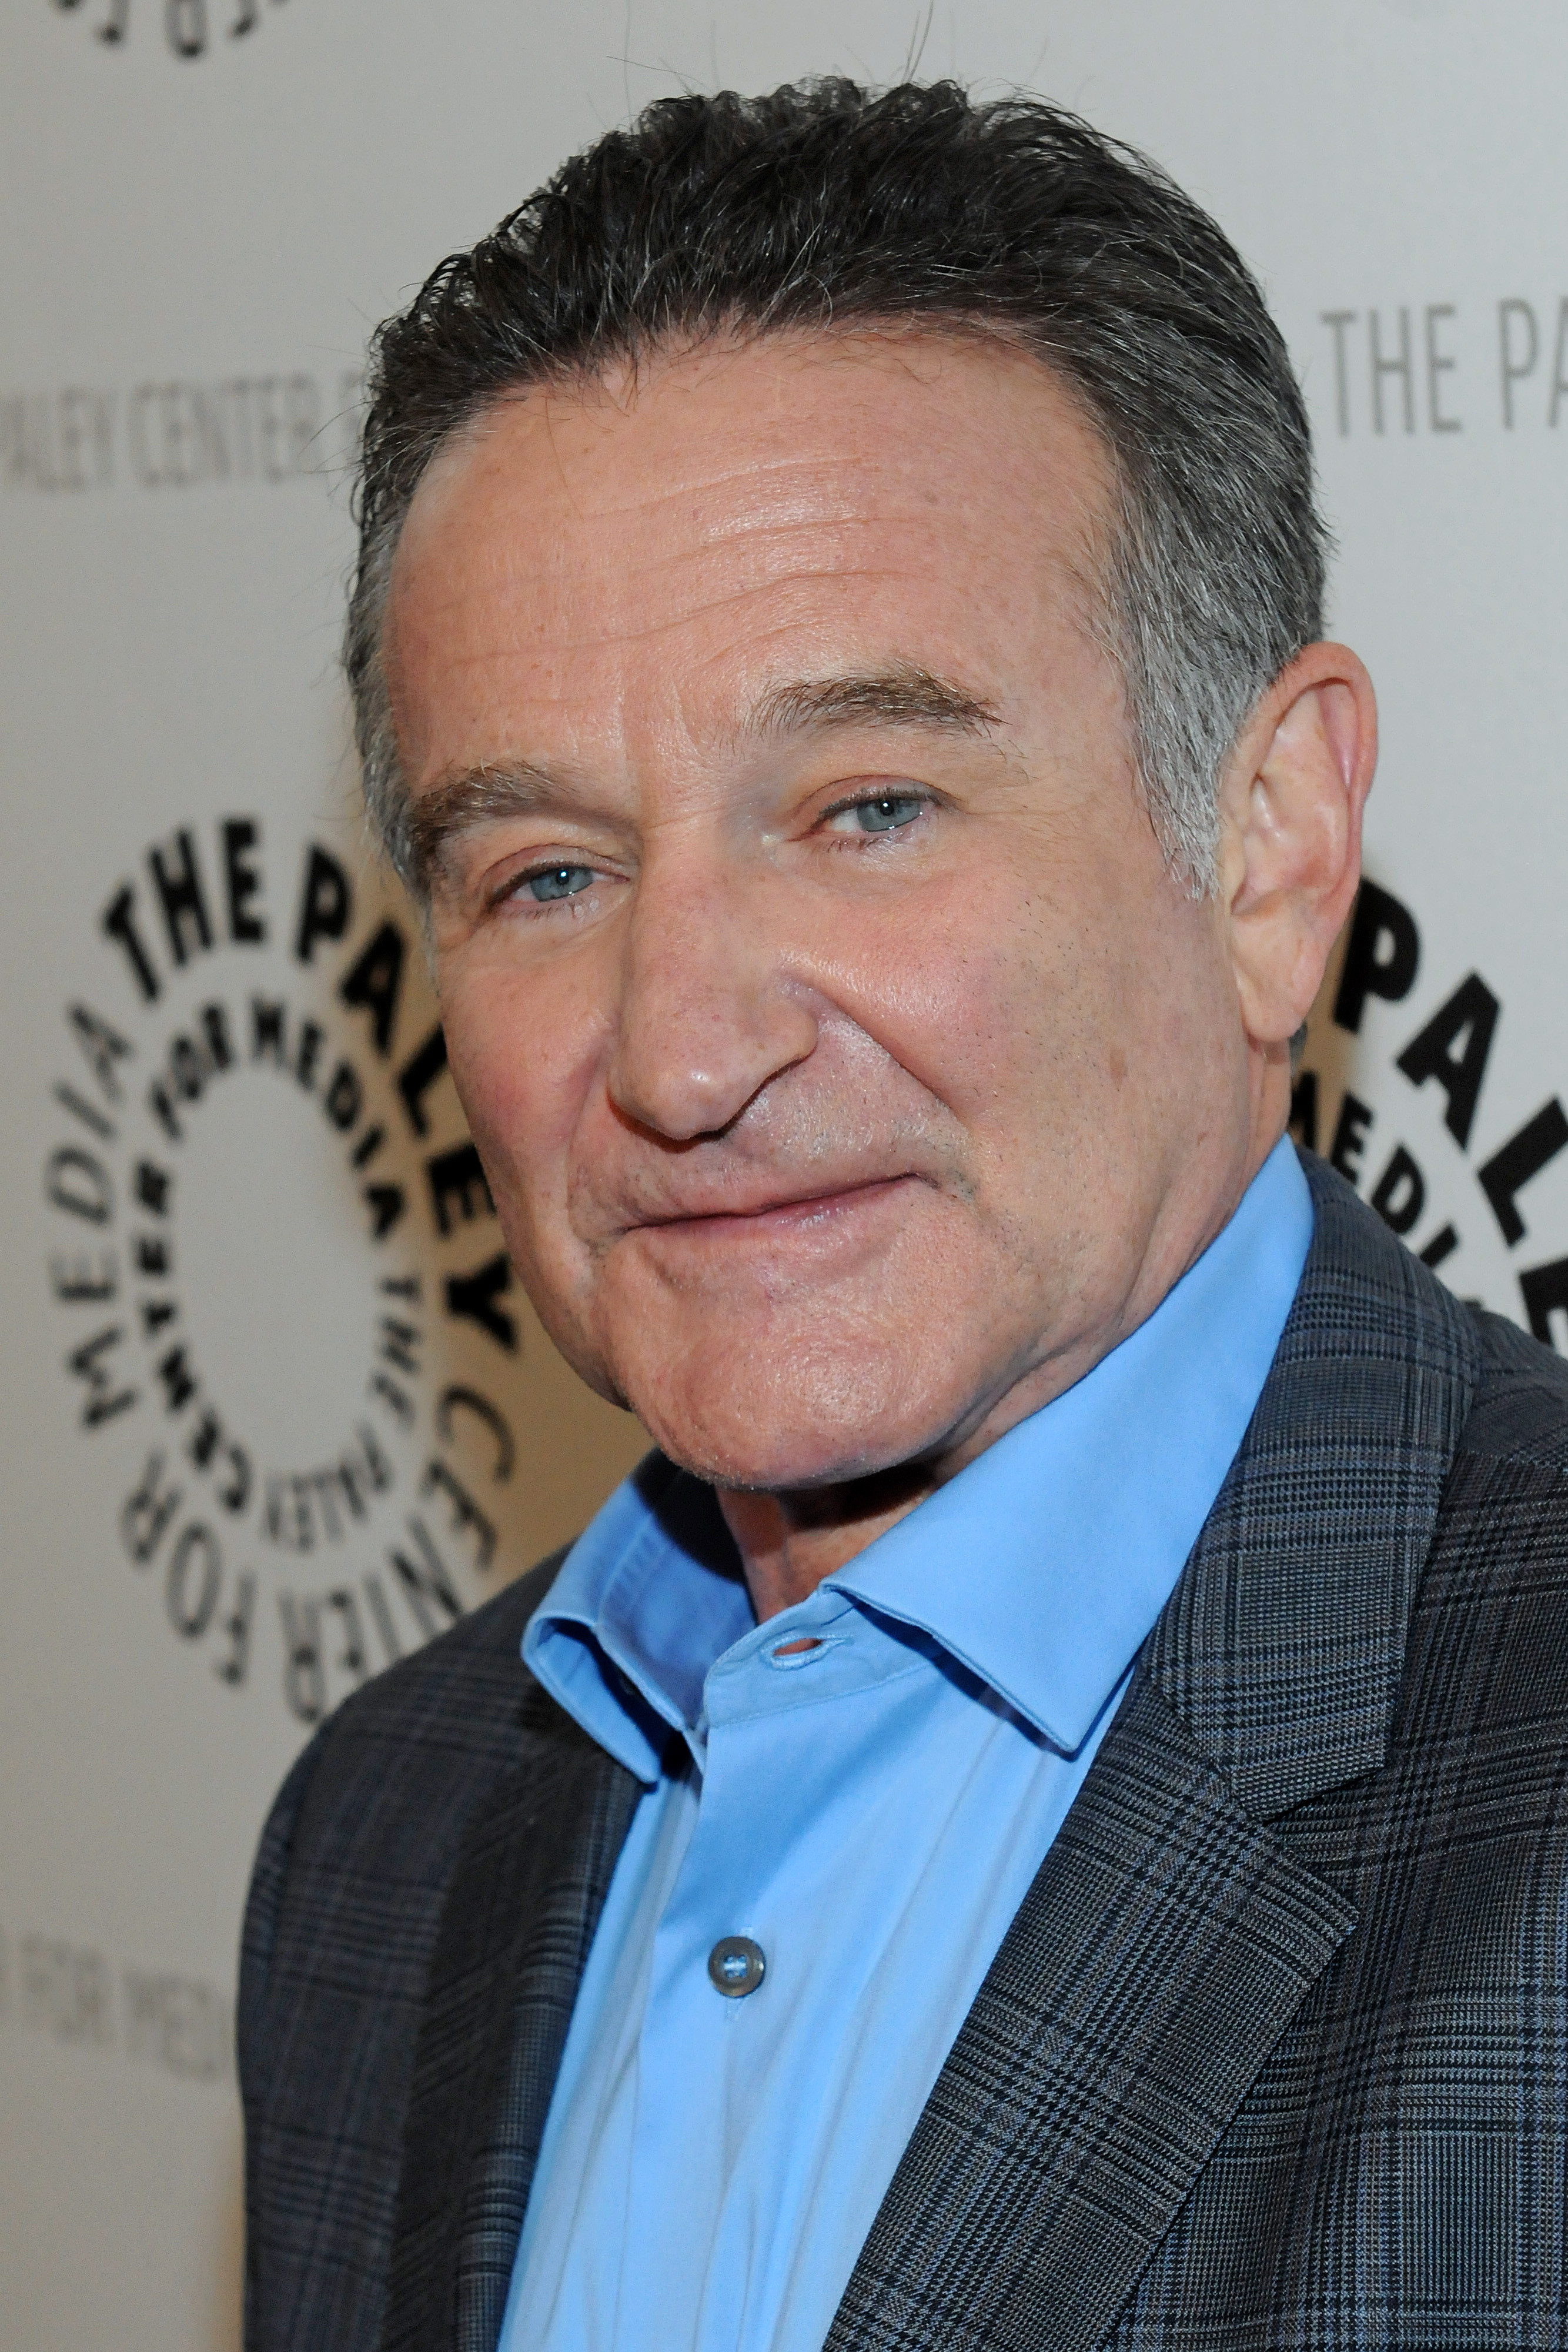 PaleyFest 2013: An Evening with Robin Williams